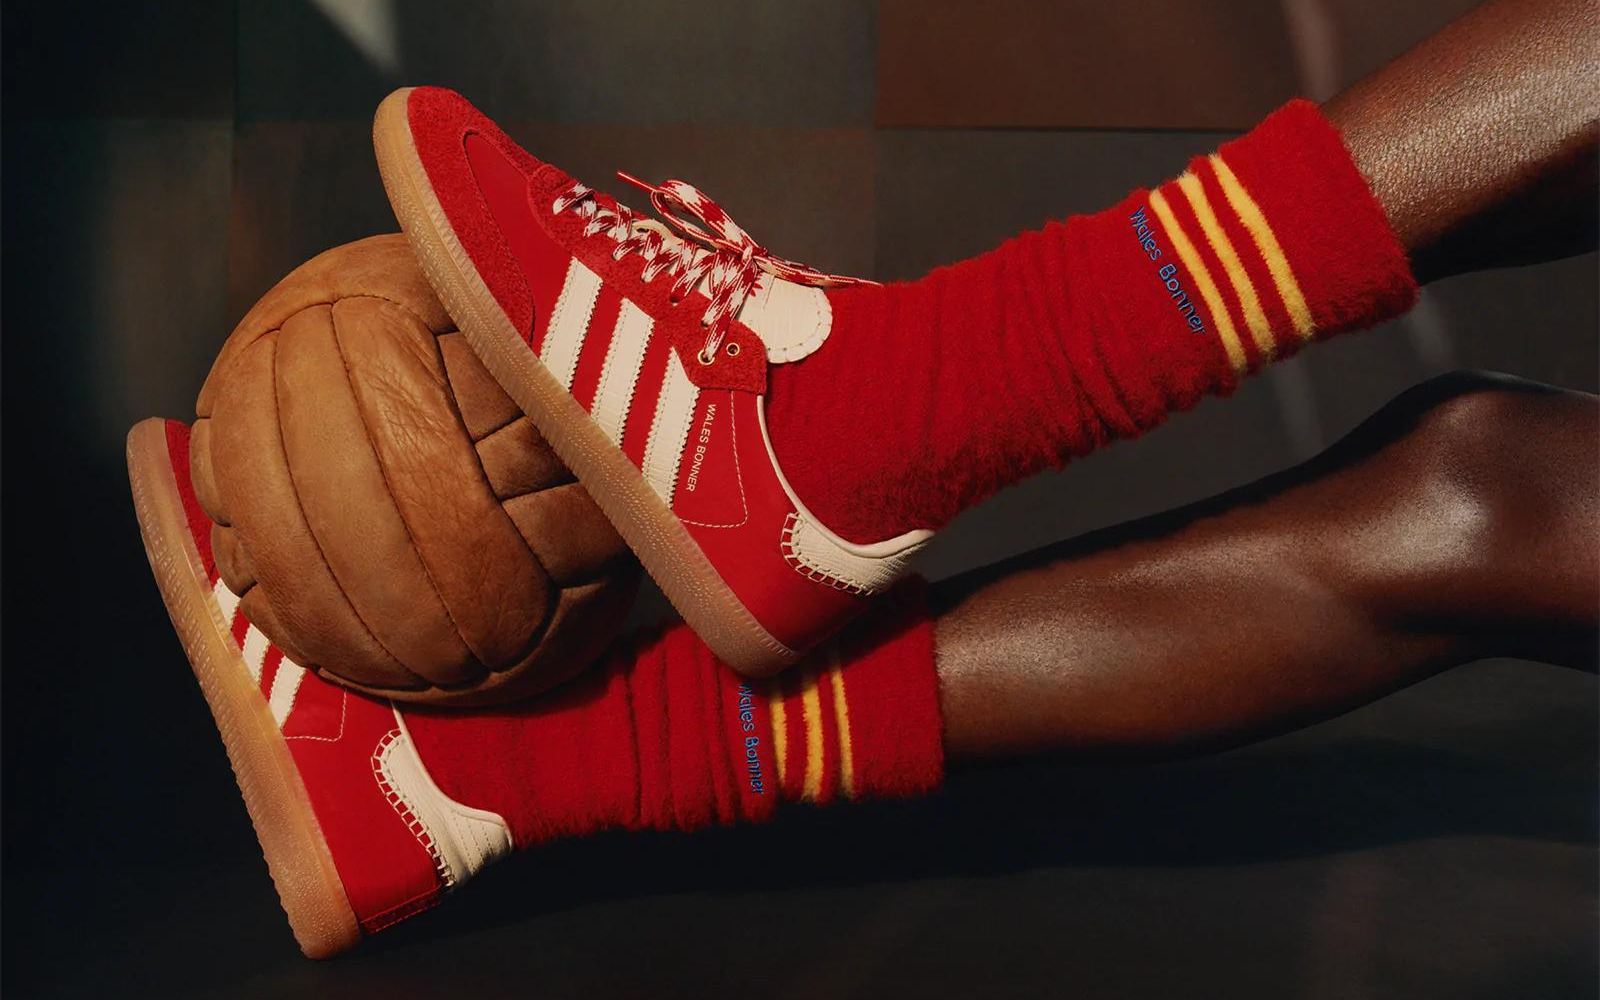 How the adidas Samba became the world's most popular football boot